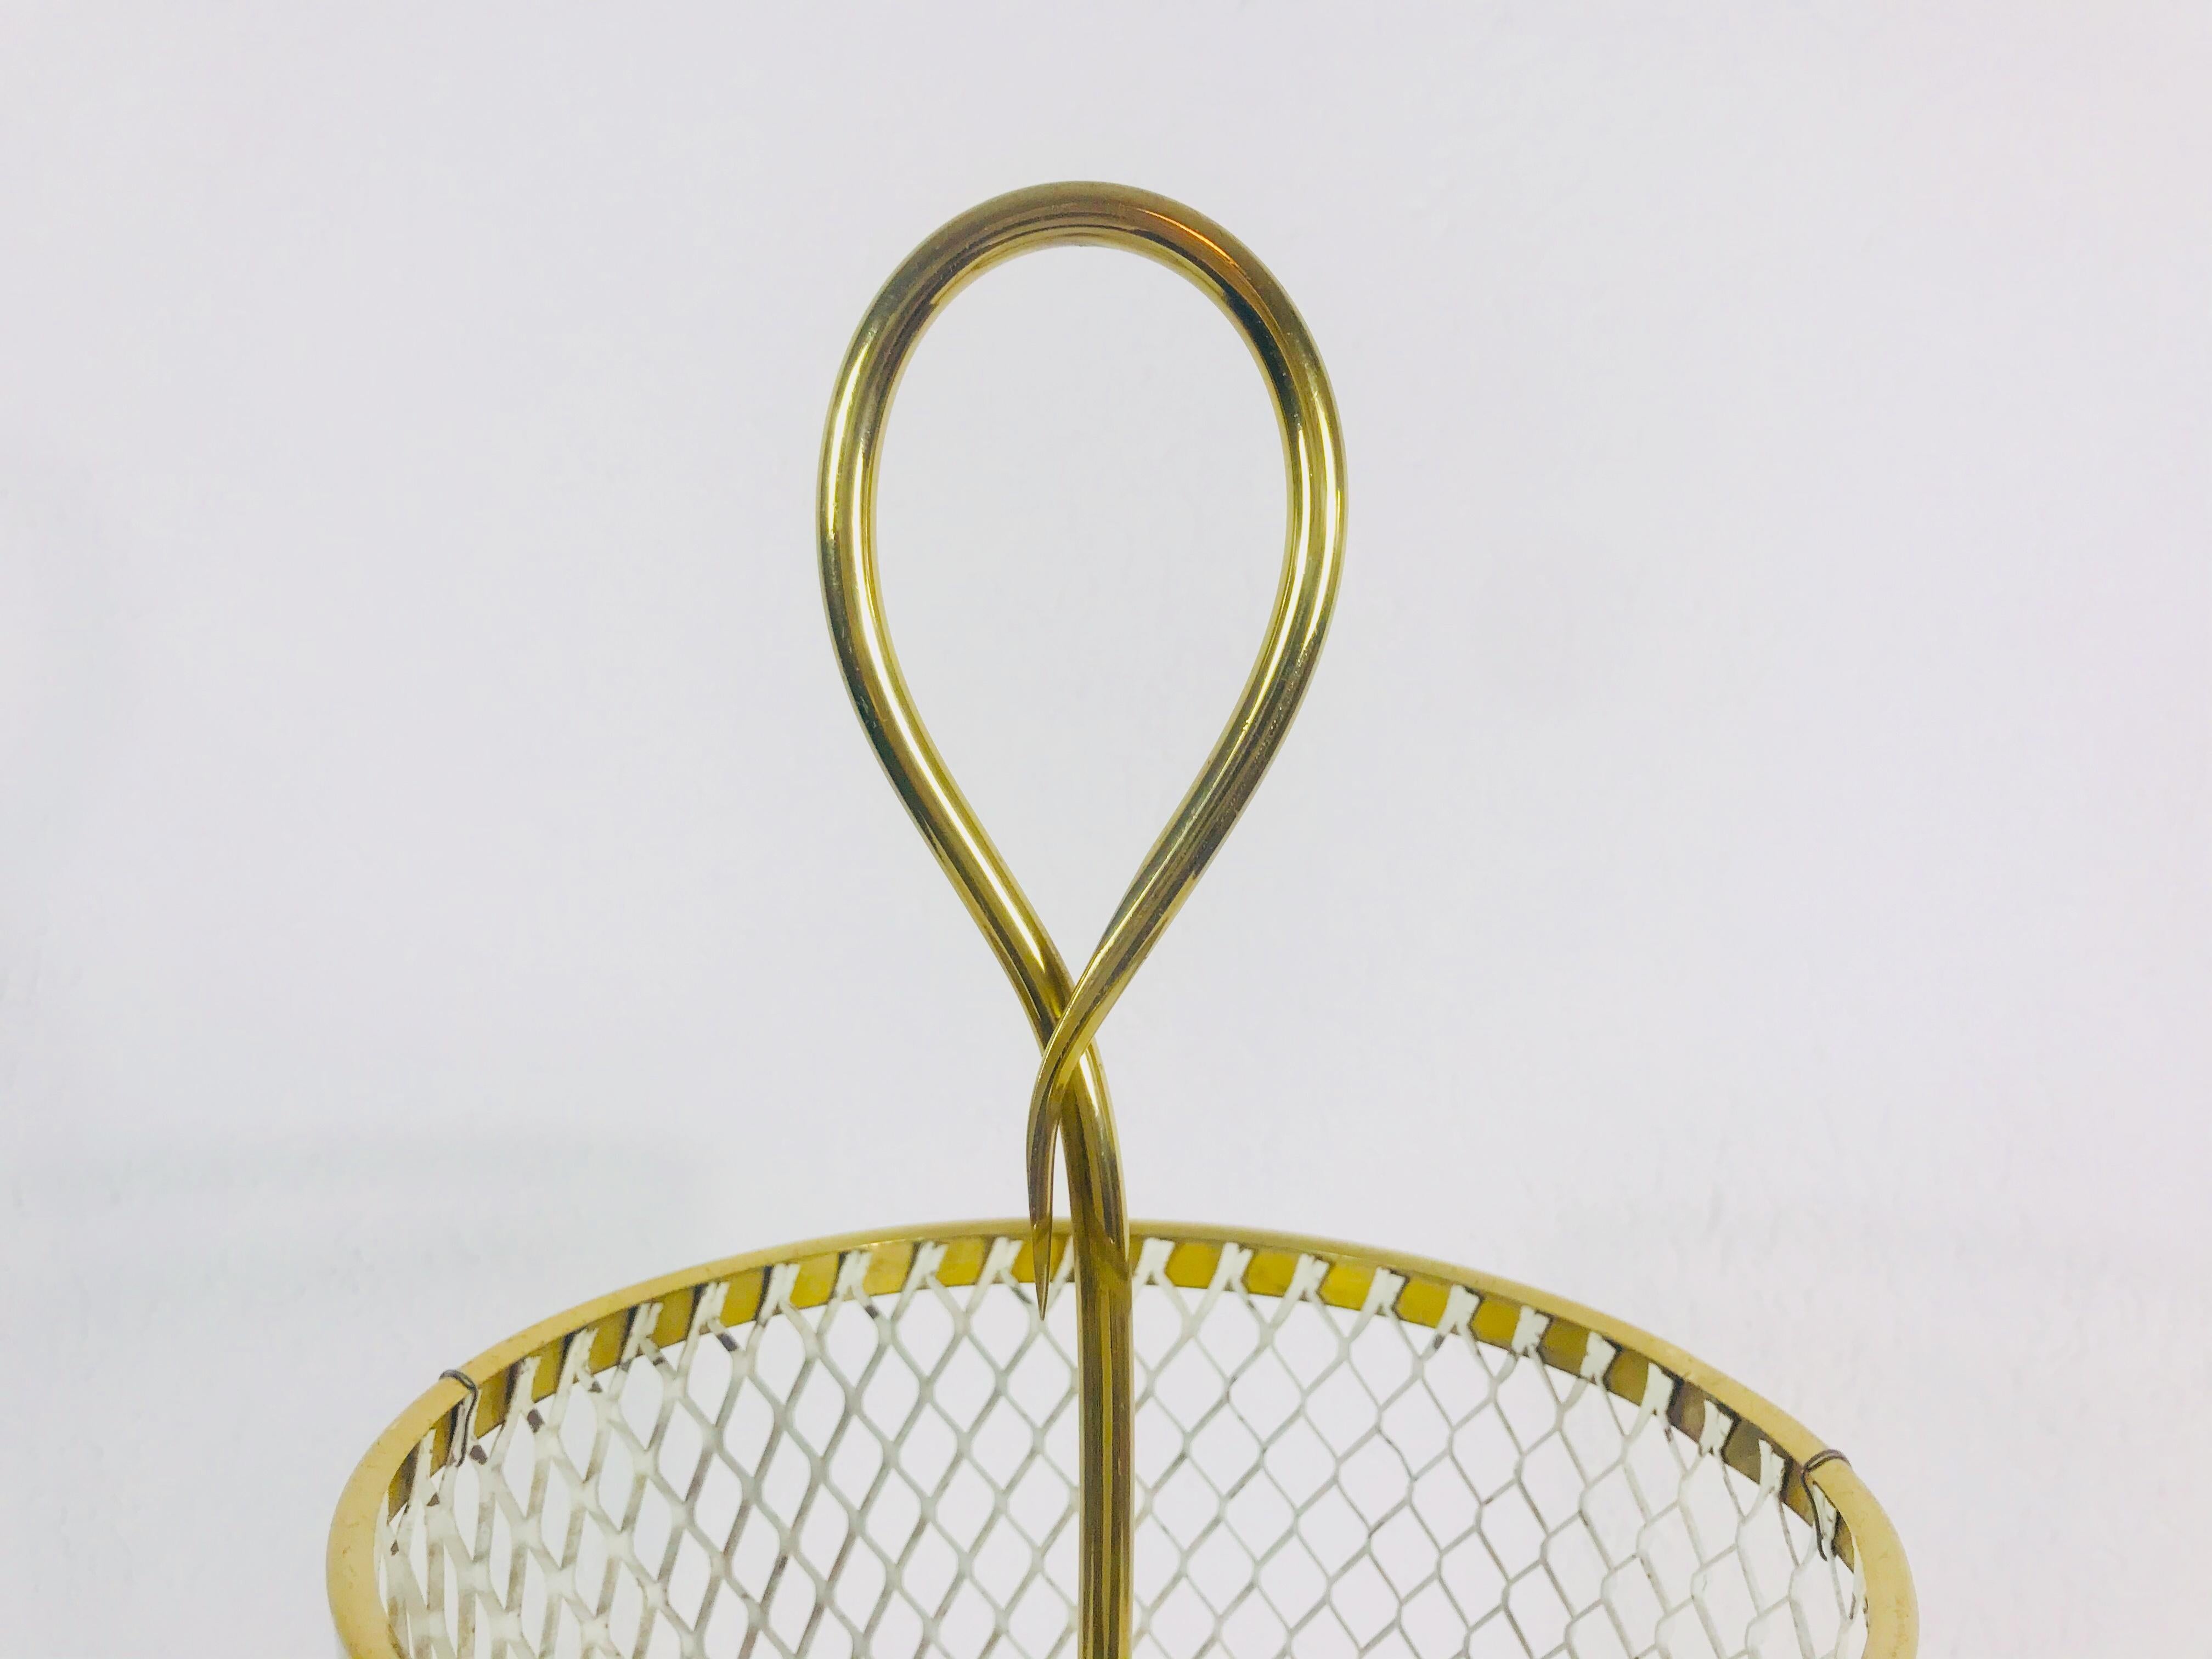 Aluminum Exceptional Midcentury Brass and Aluminium Umbrella Stand, Germany, 1960s For Sale